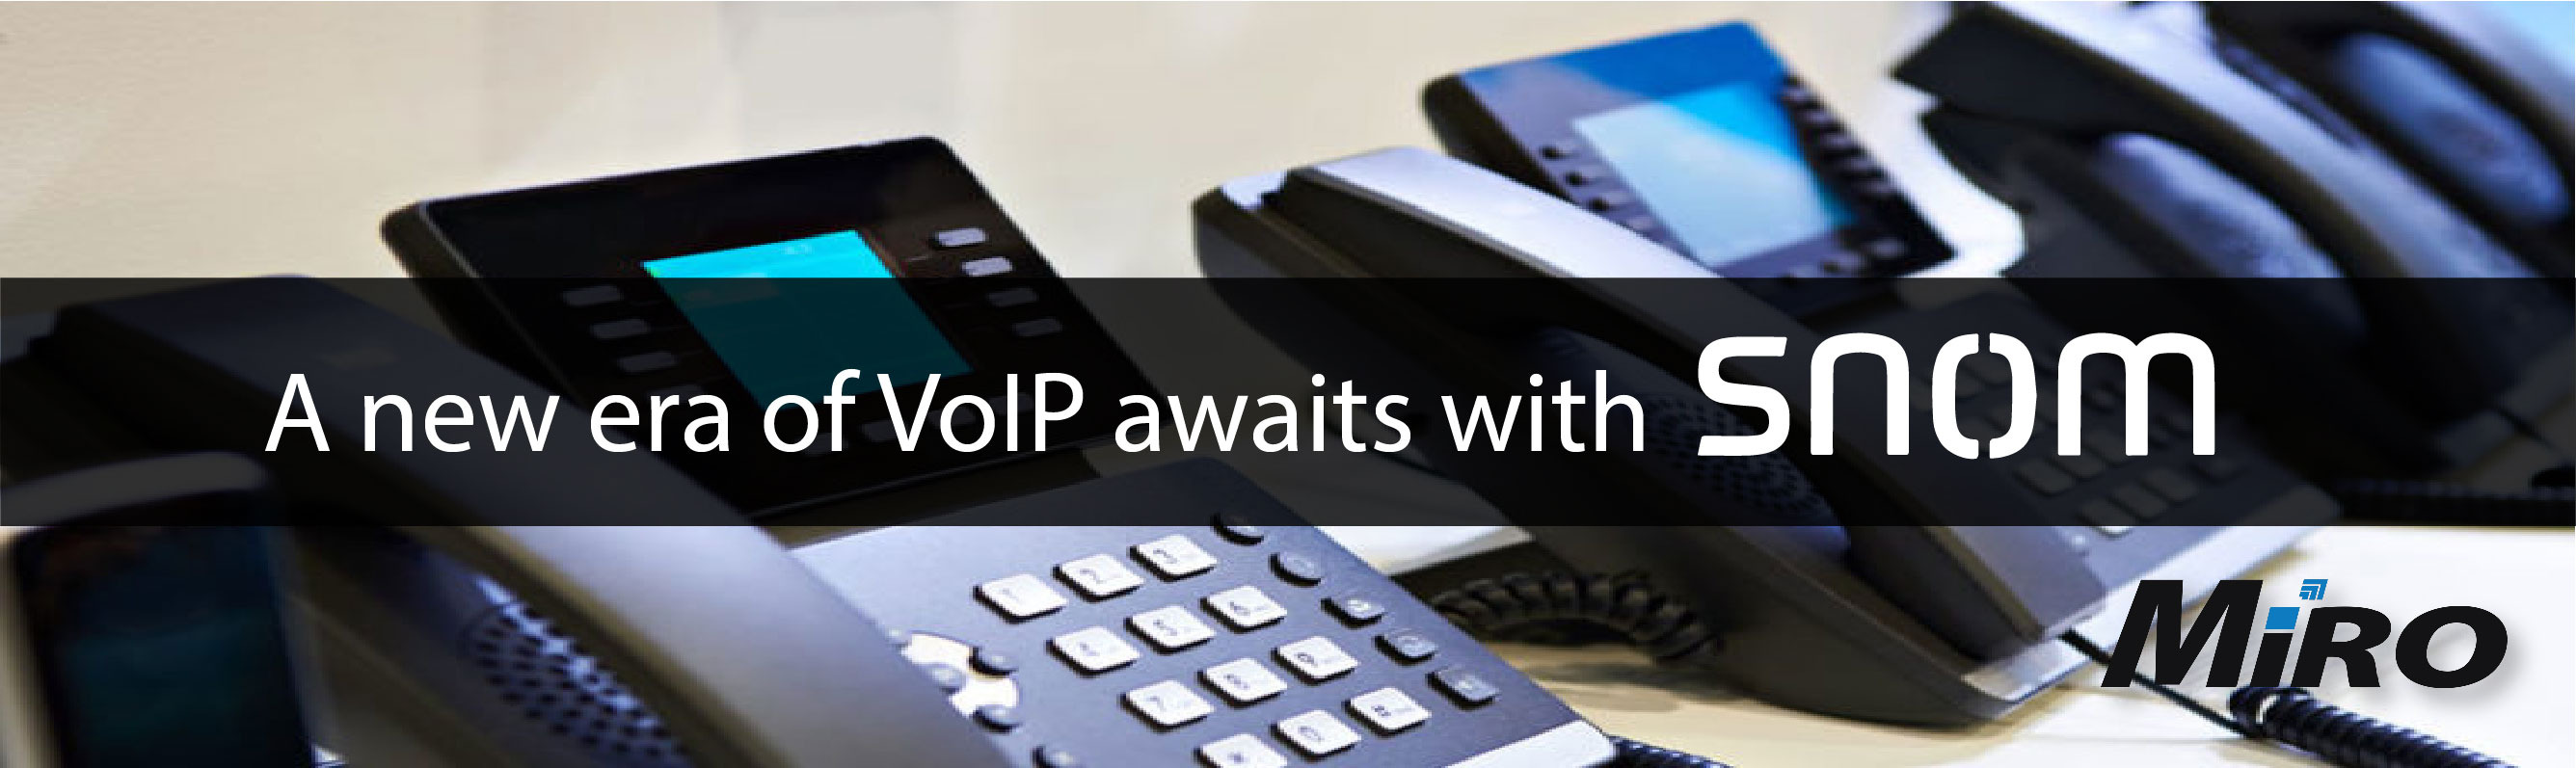 A new era of VoIP awaits with SNOM 